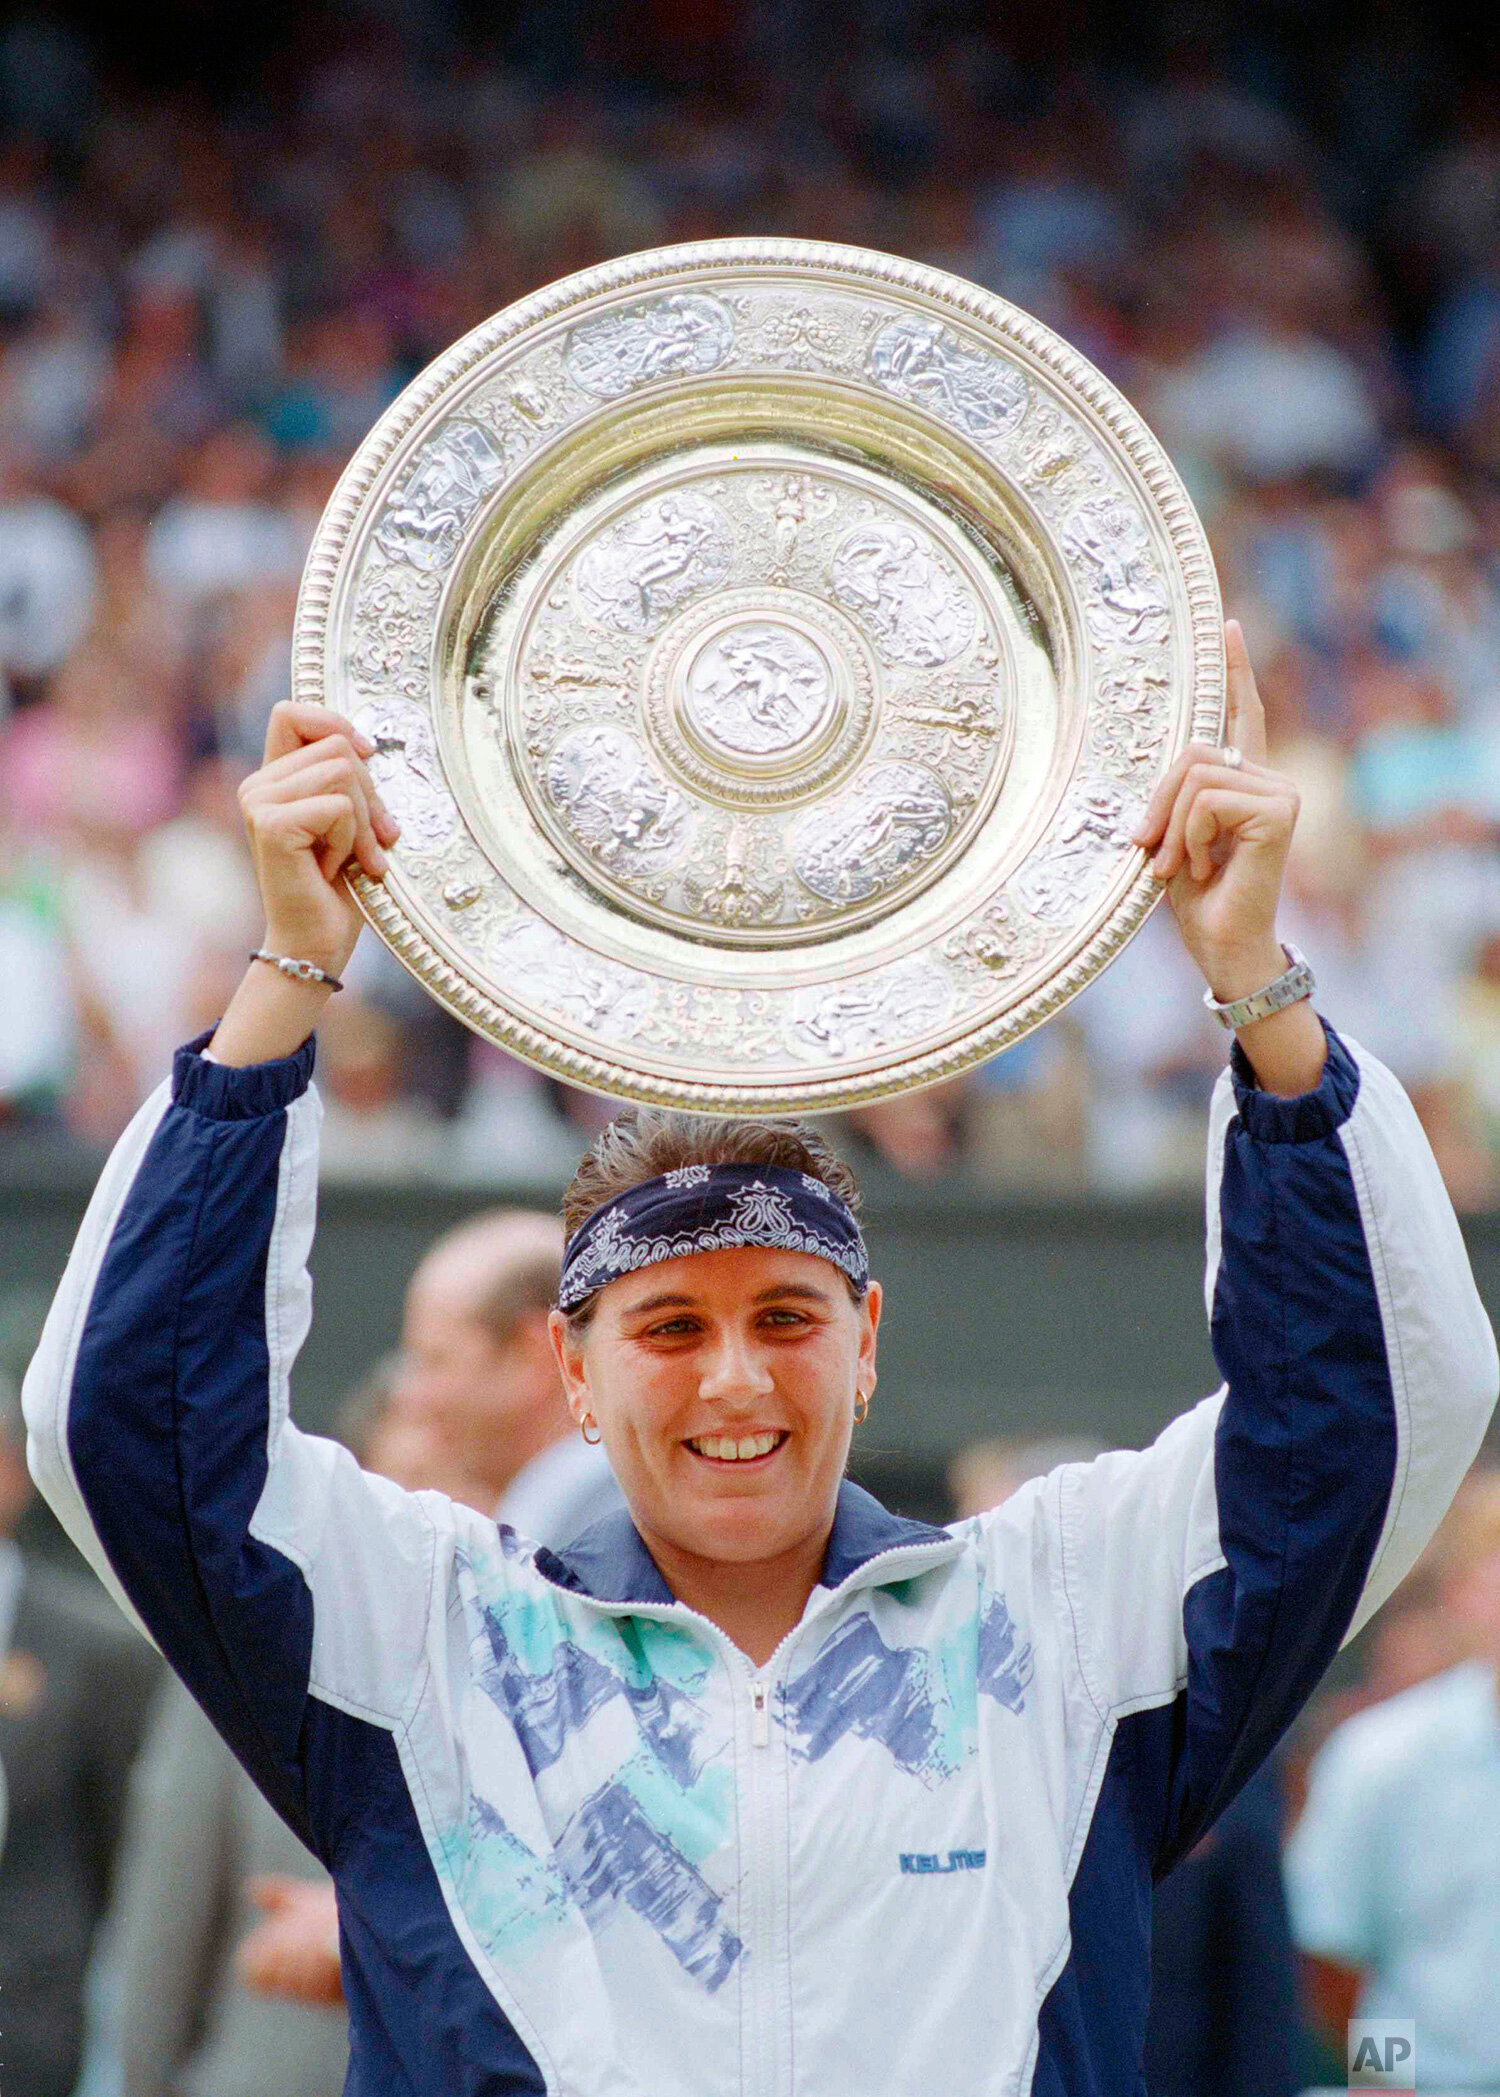  Conchita Martinez holds up the trophy after winning the ladies singles final on the Centre Court at Wimbledon, July 2, 1994. Martinez defeated Martina Navratilova, 6-4, 3-6, 6-3, to win the championship. (AP Photo/Dave Caulkin) 